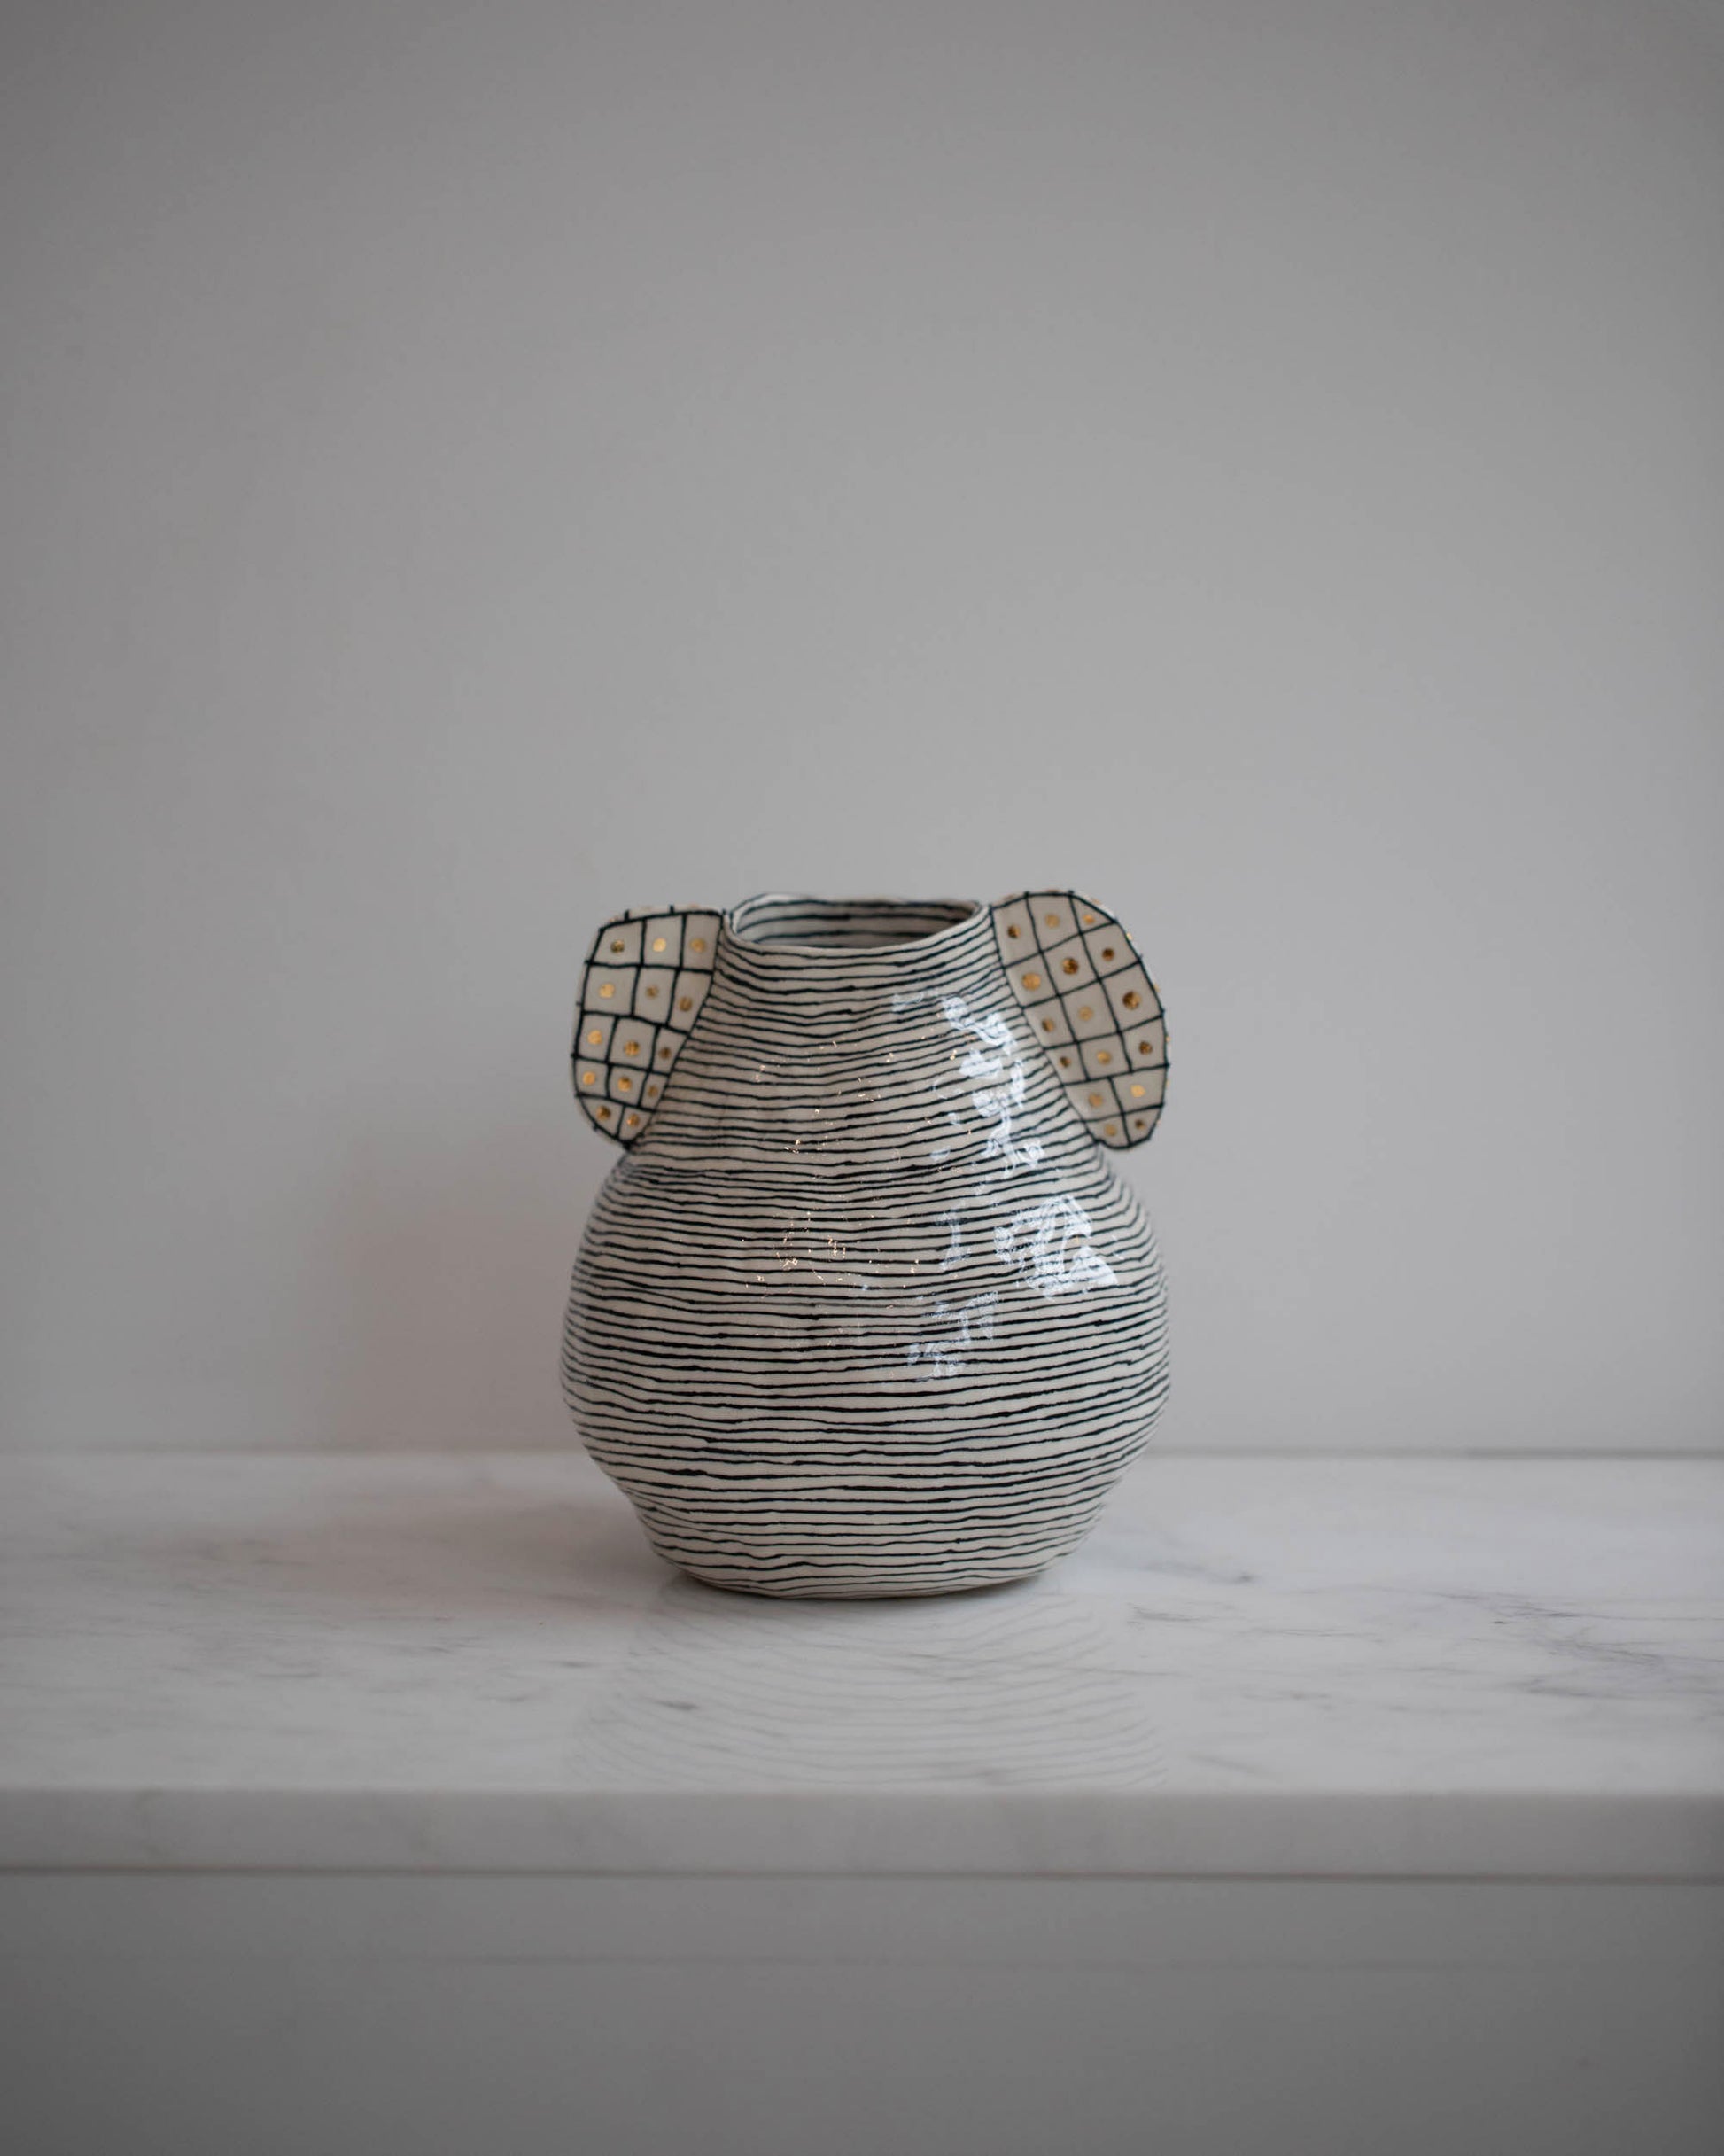 Suzanne Sullivan Discover The Range Considering Utility Vase on light color background.